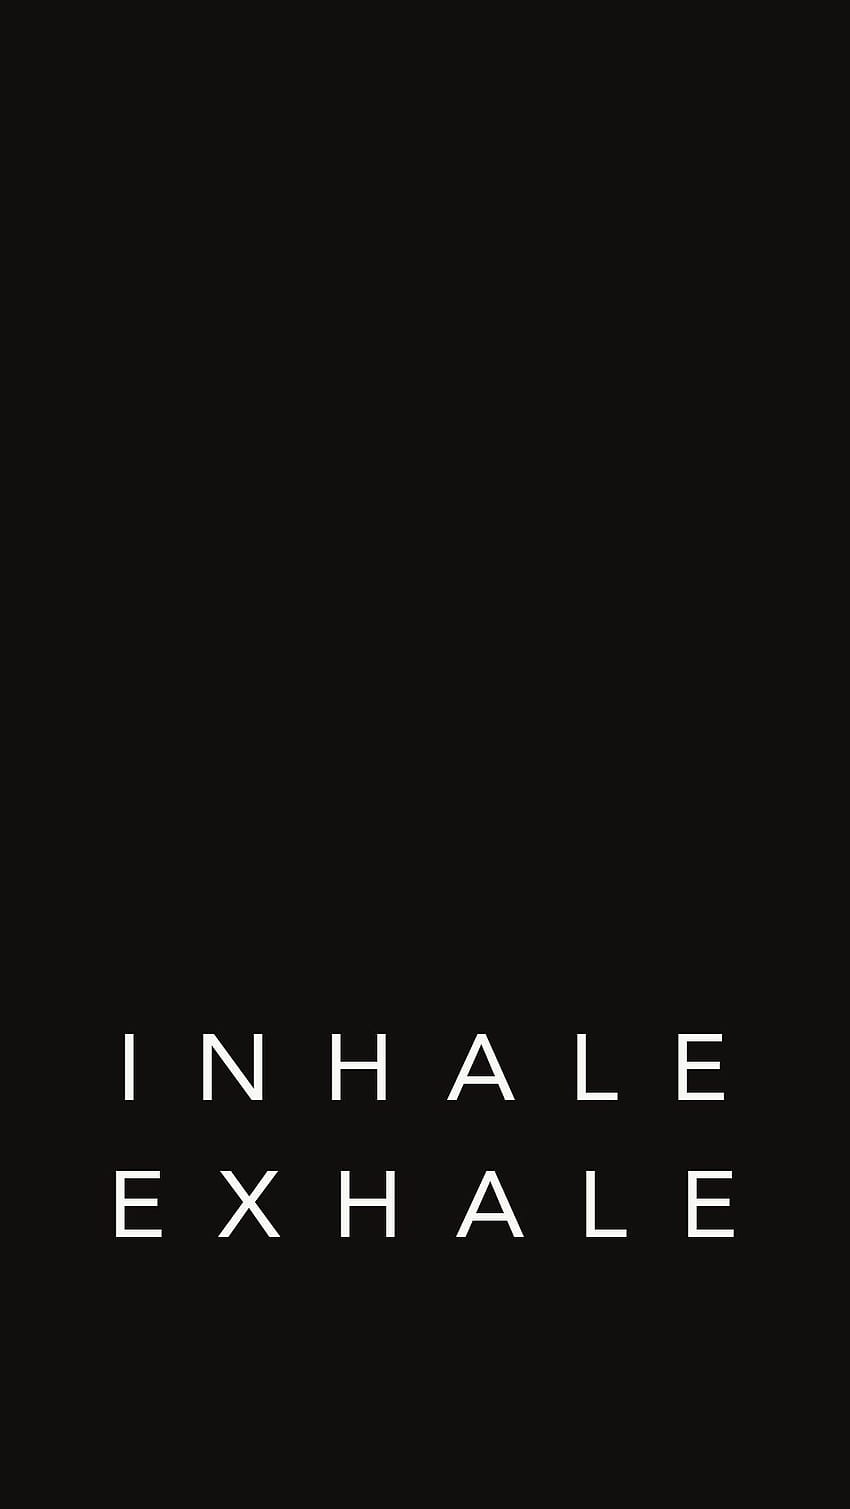 Inhale exhale quotes, Inhale exhale, Fitness iphone HD phone wallpaper